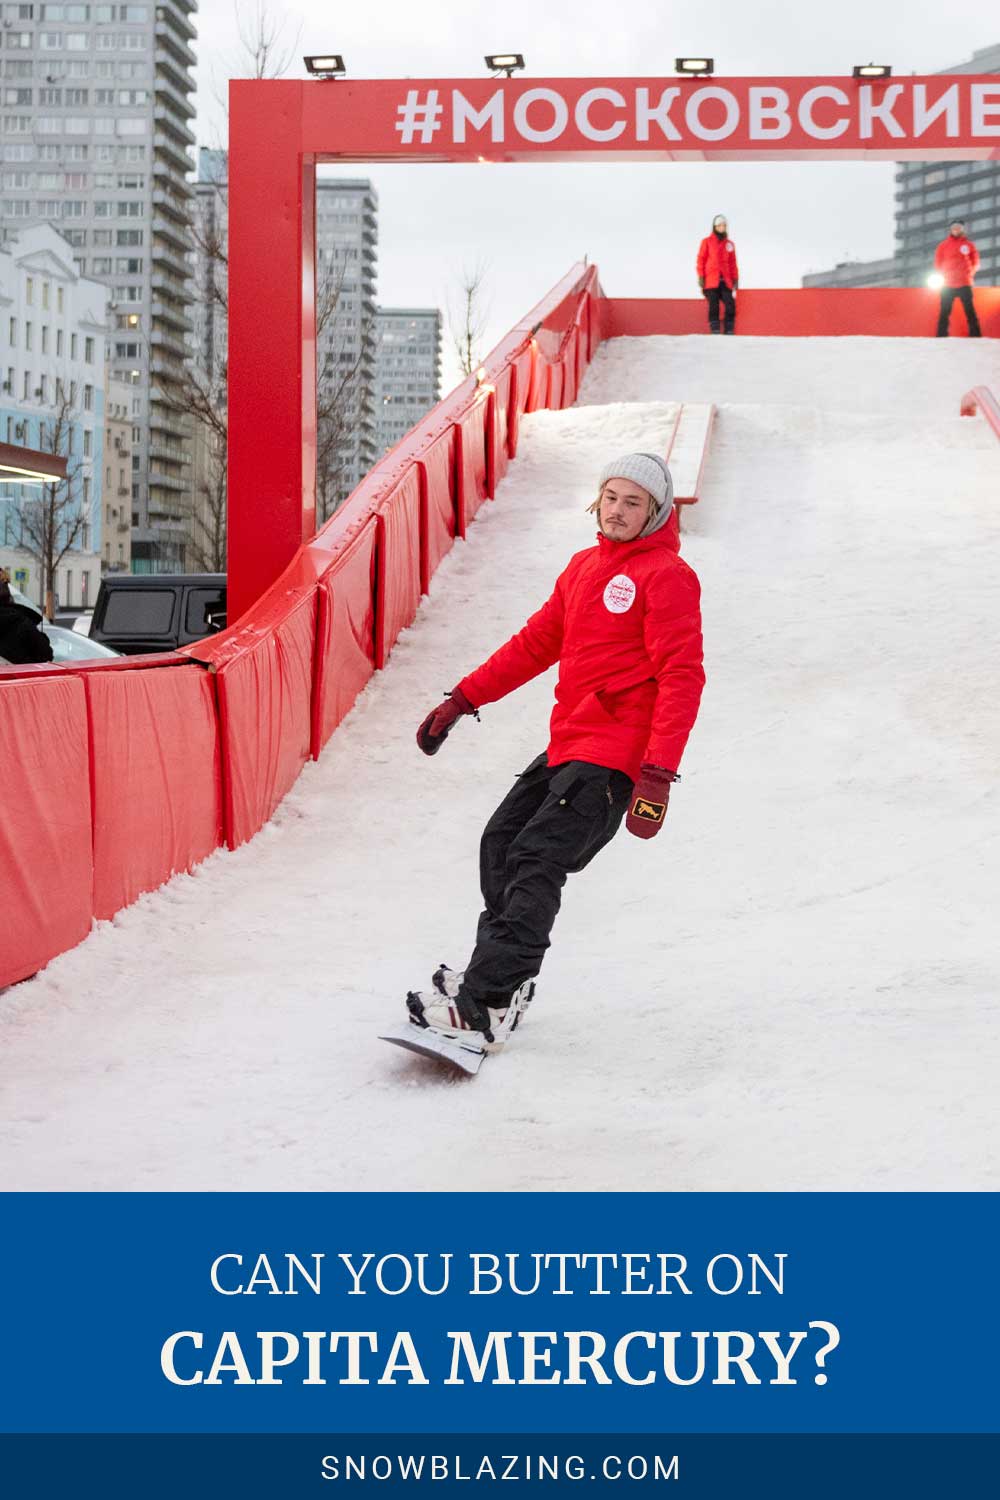 Guy wearing red jacket and black pants snowboarding - Can You Butter On Capita Mercury?